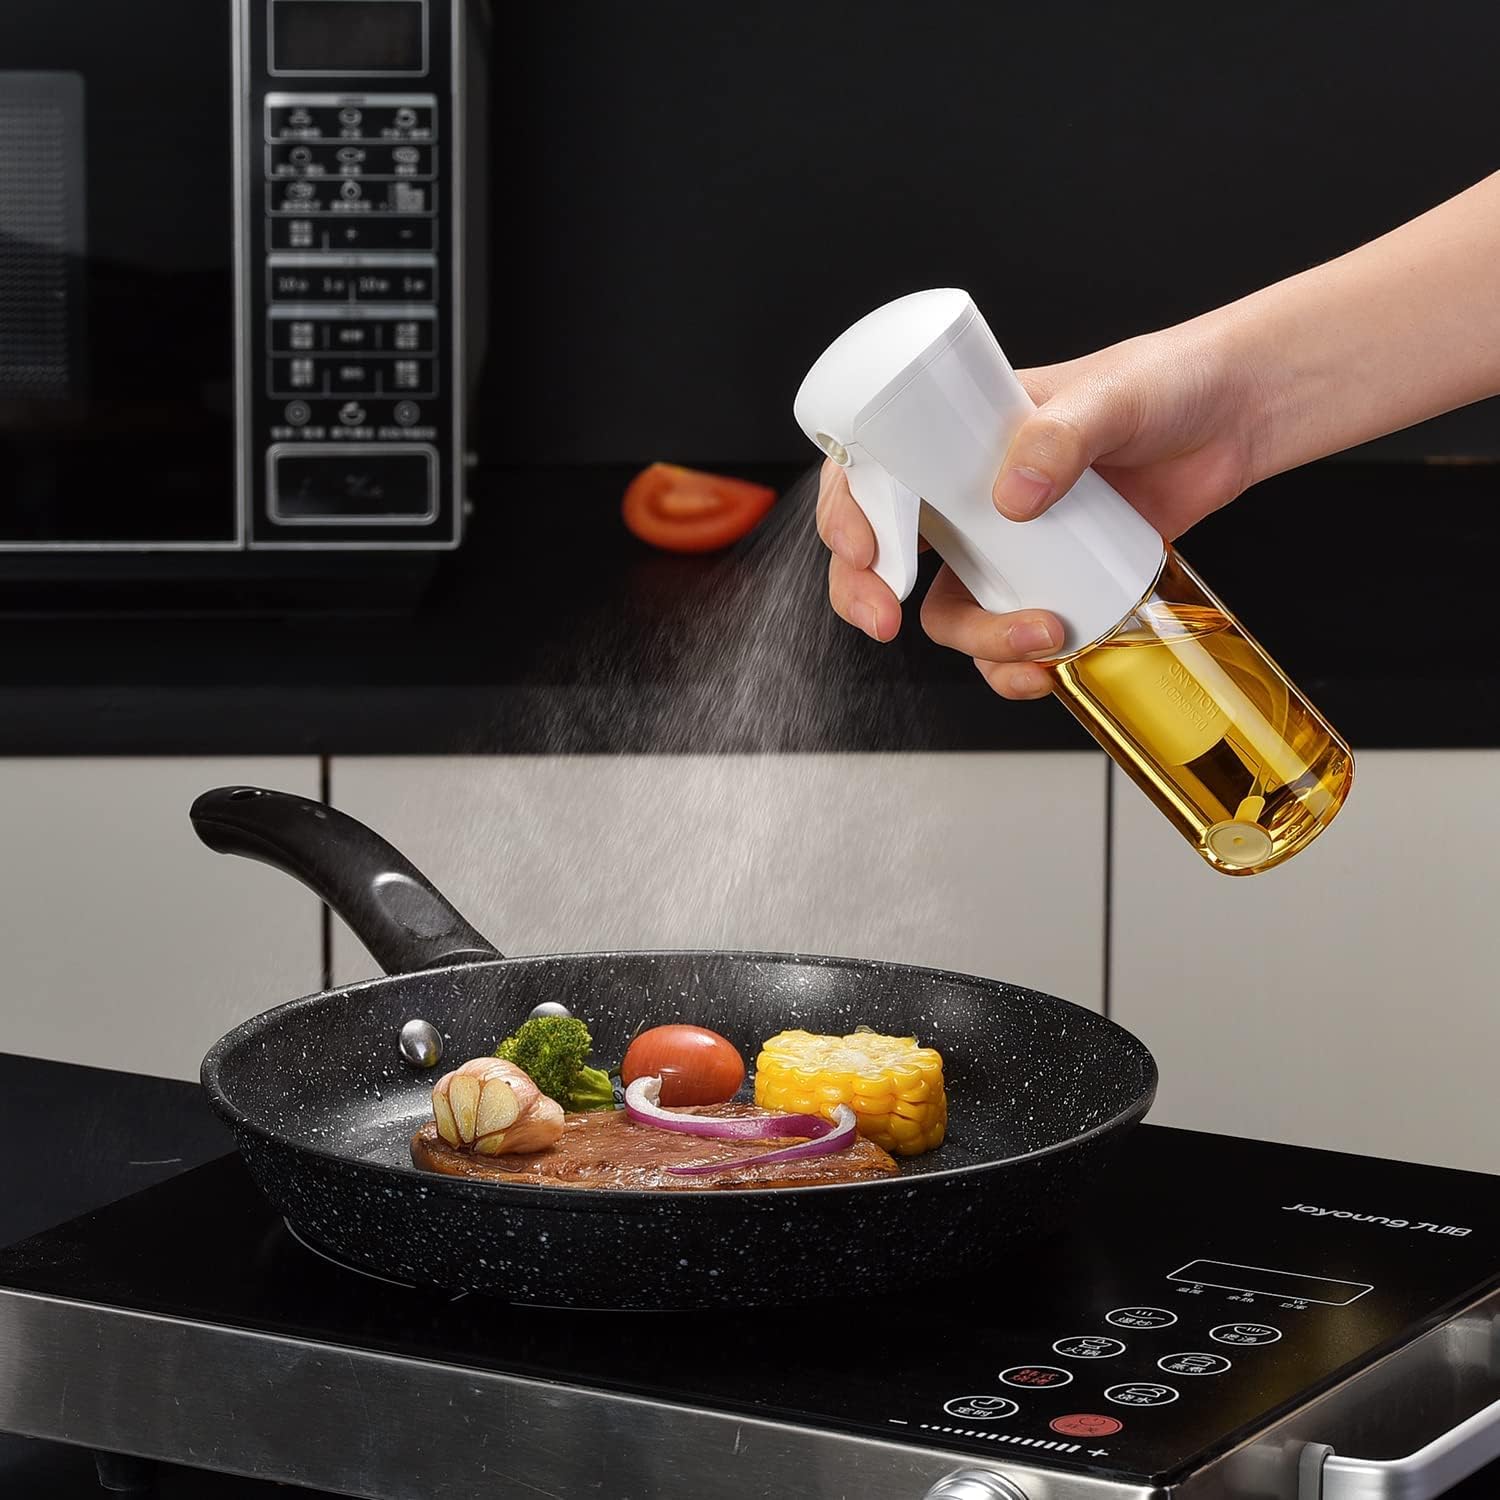 Oil Sprayer for Cooking, 200ml Olive Oil Sprayer Mister, Olive Oil Spray Bottle, Kitchen Gadgets Accessories for Air Fryer, Canola Oil Spritzer, Widely Used for Salad Making, Baking, Frying, BBQ